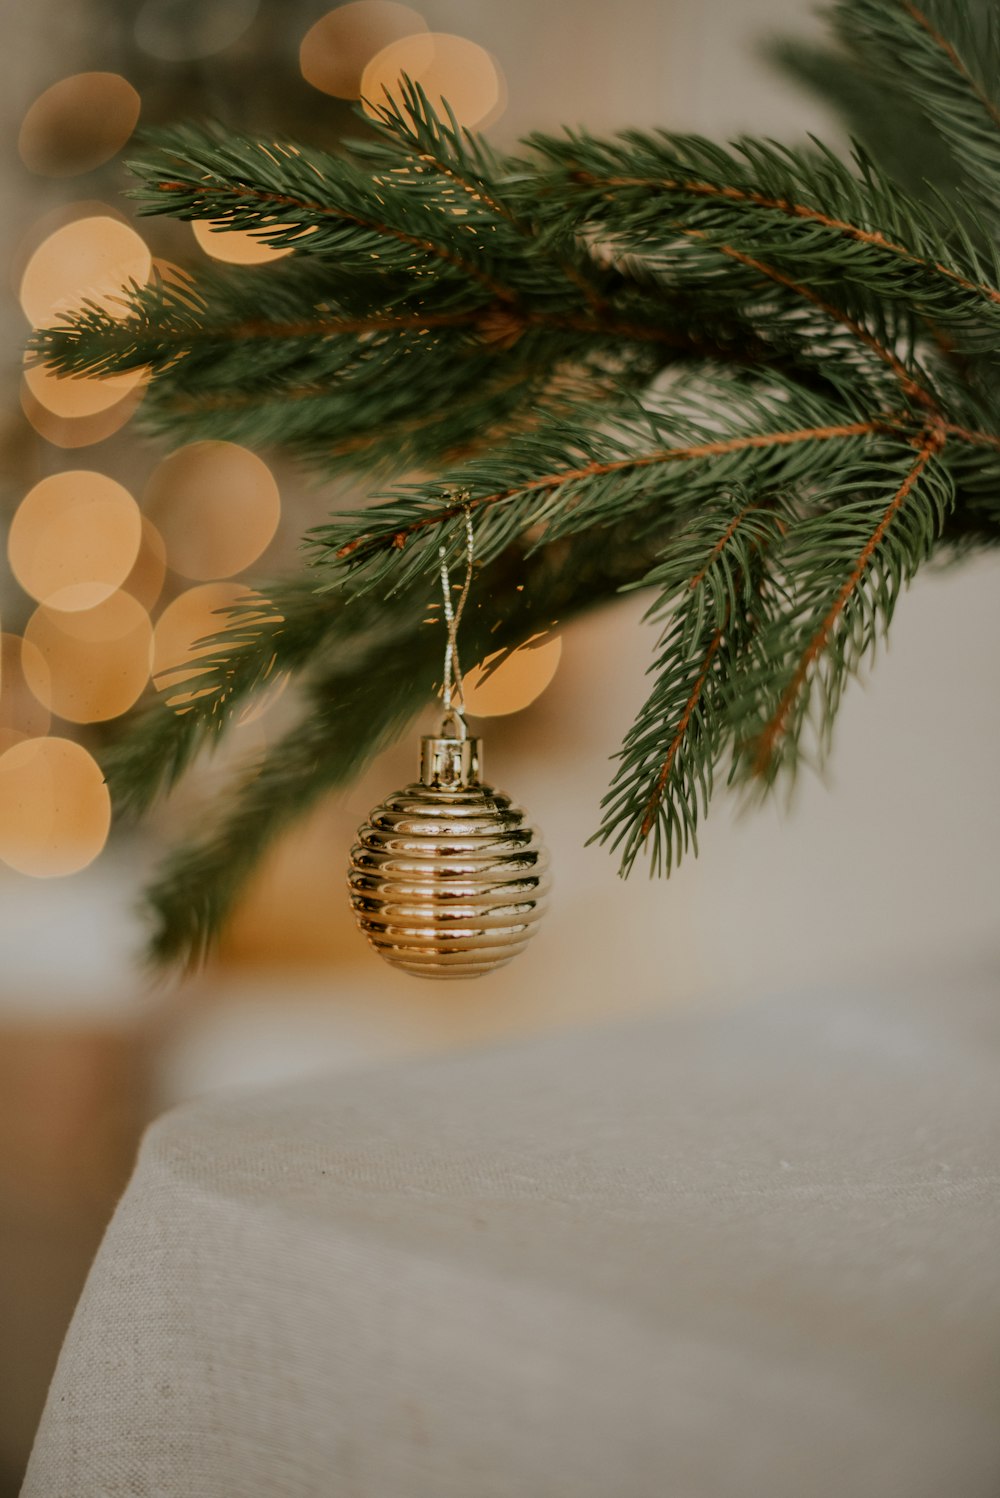 a christmas ornament hanging from a pine tree